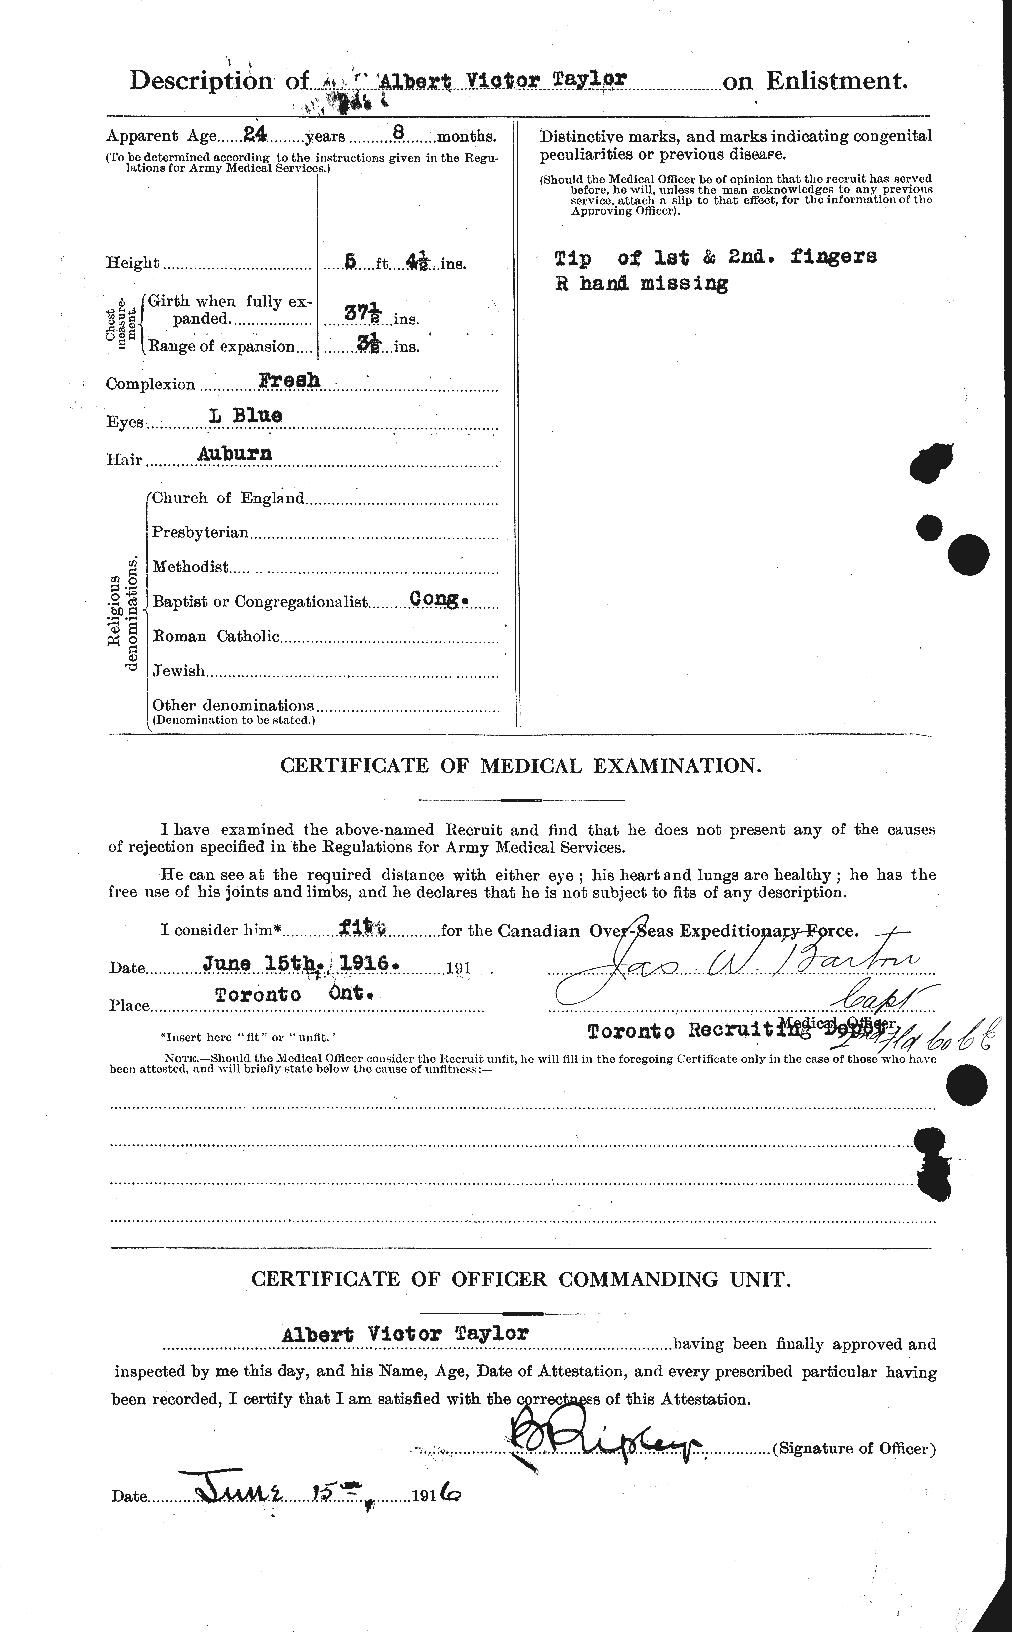 Personnel Records of the First World War - CEF 626126b